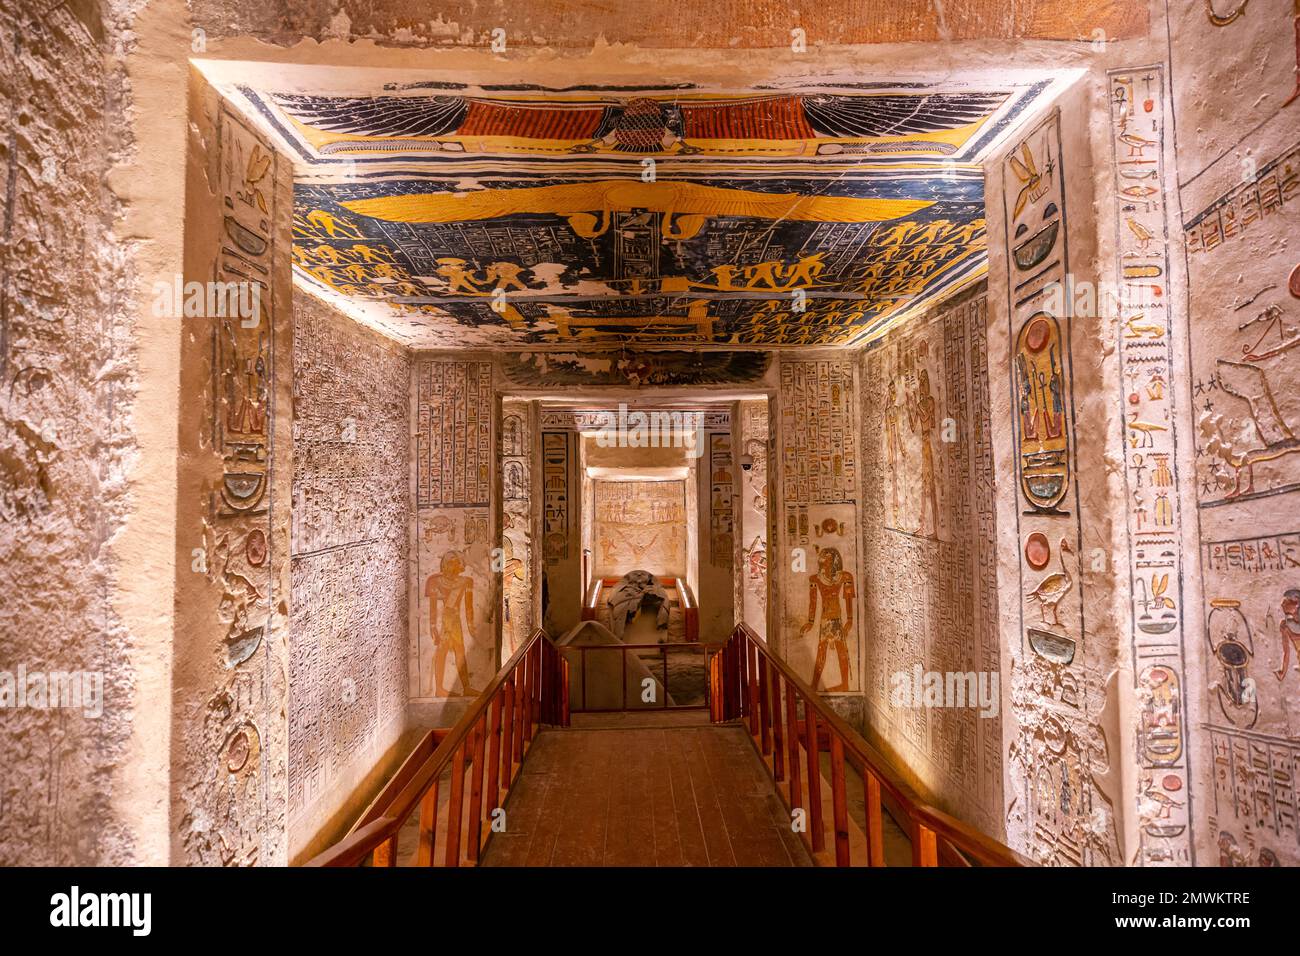 Ramesses VI tomb at Valley of the Kings, Luxor, Egypt Stock Photo